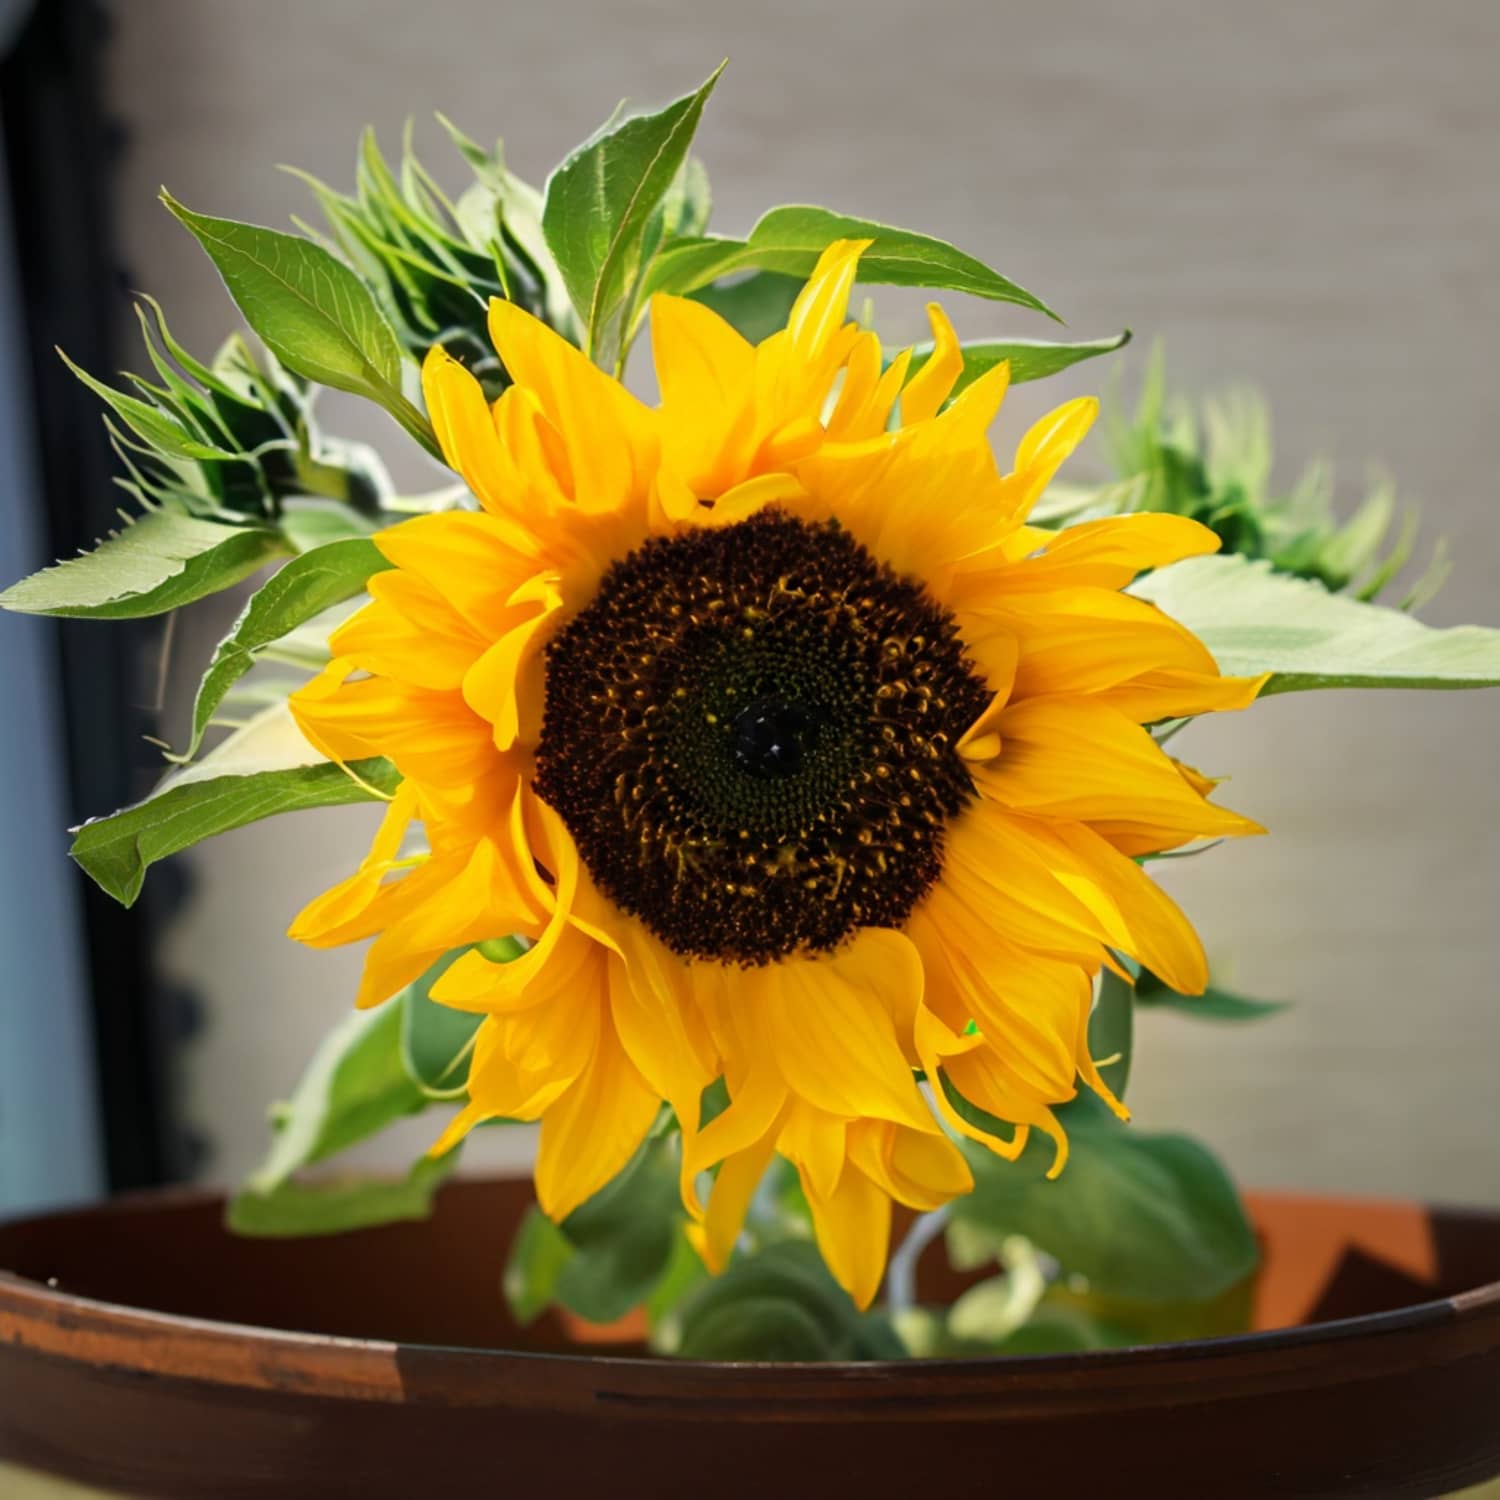 Growing Sunflowers in Pots - Planting & Care Advice